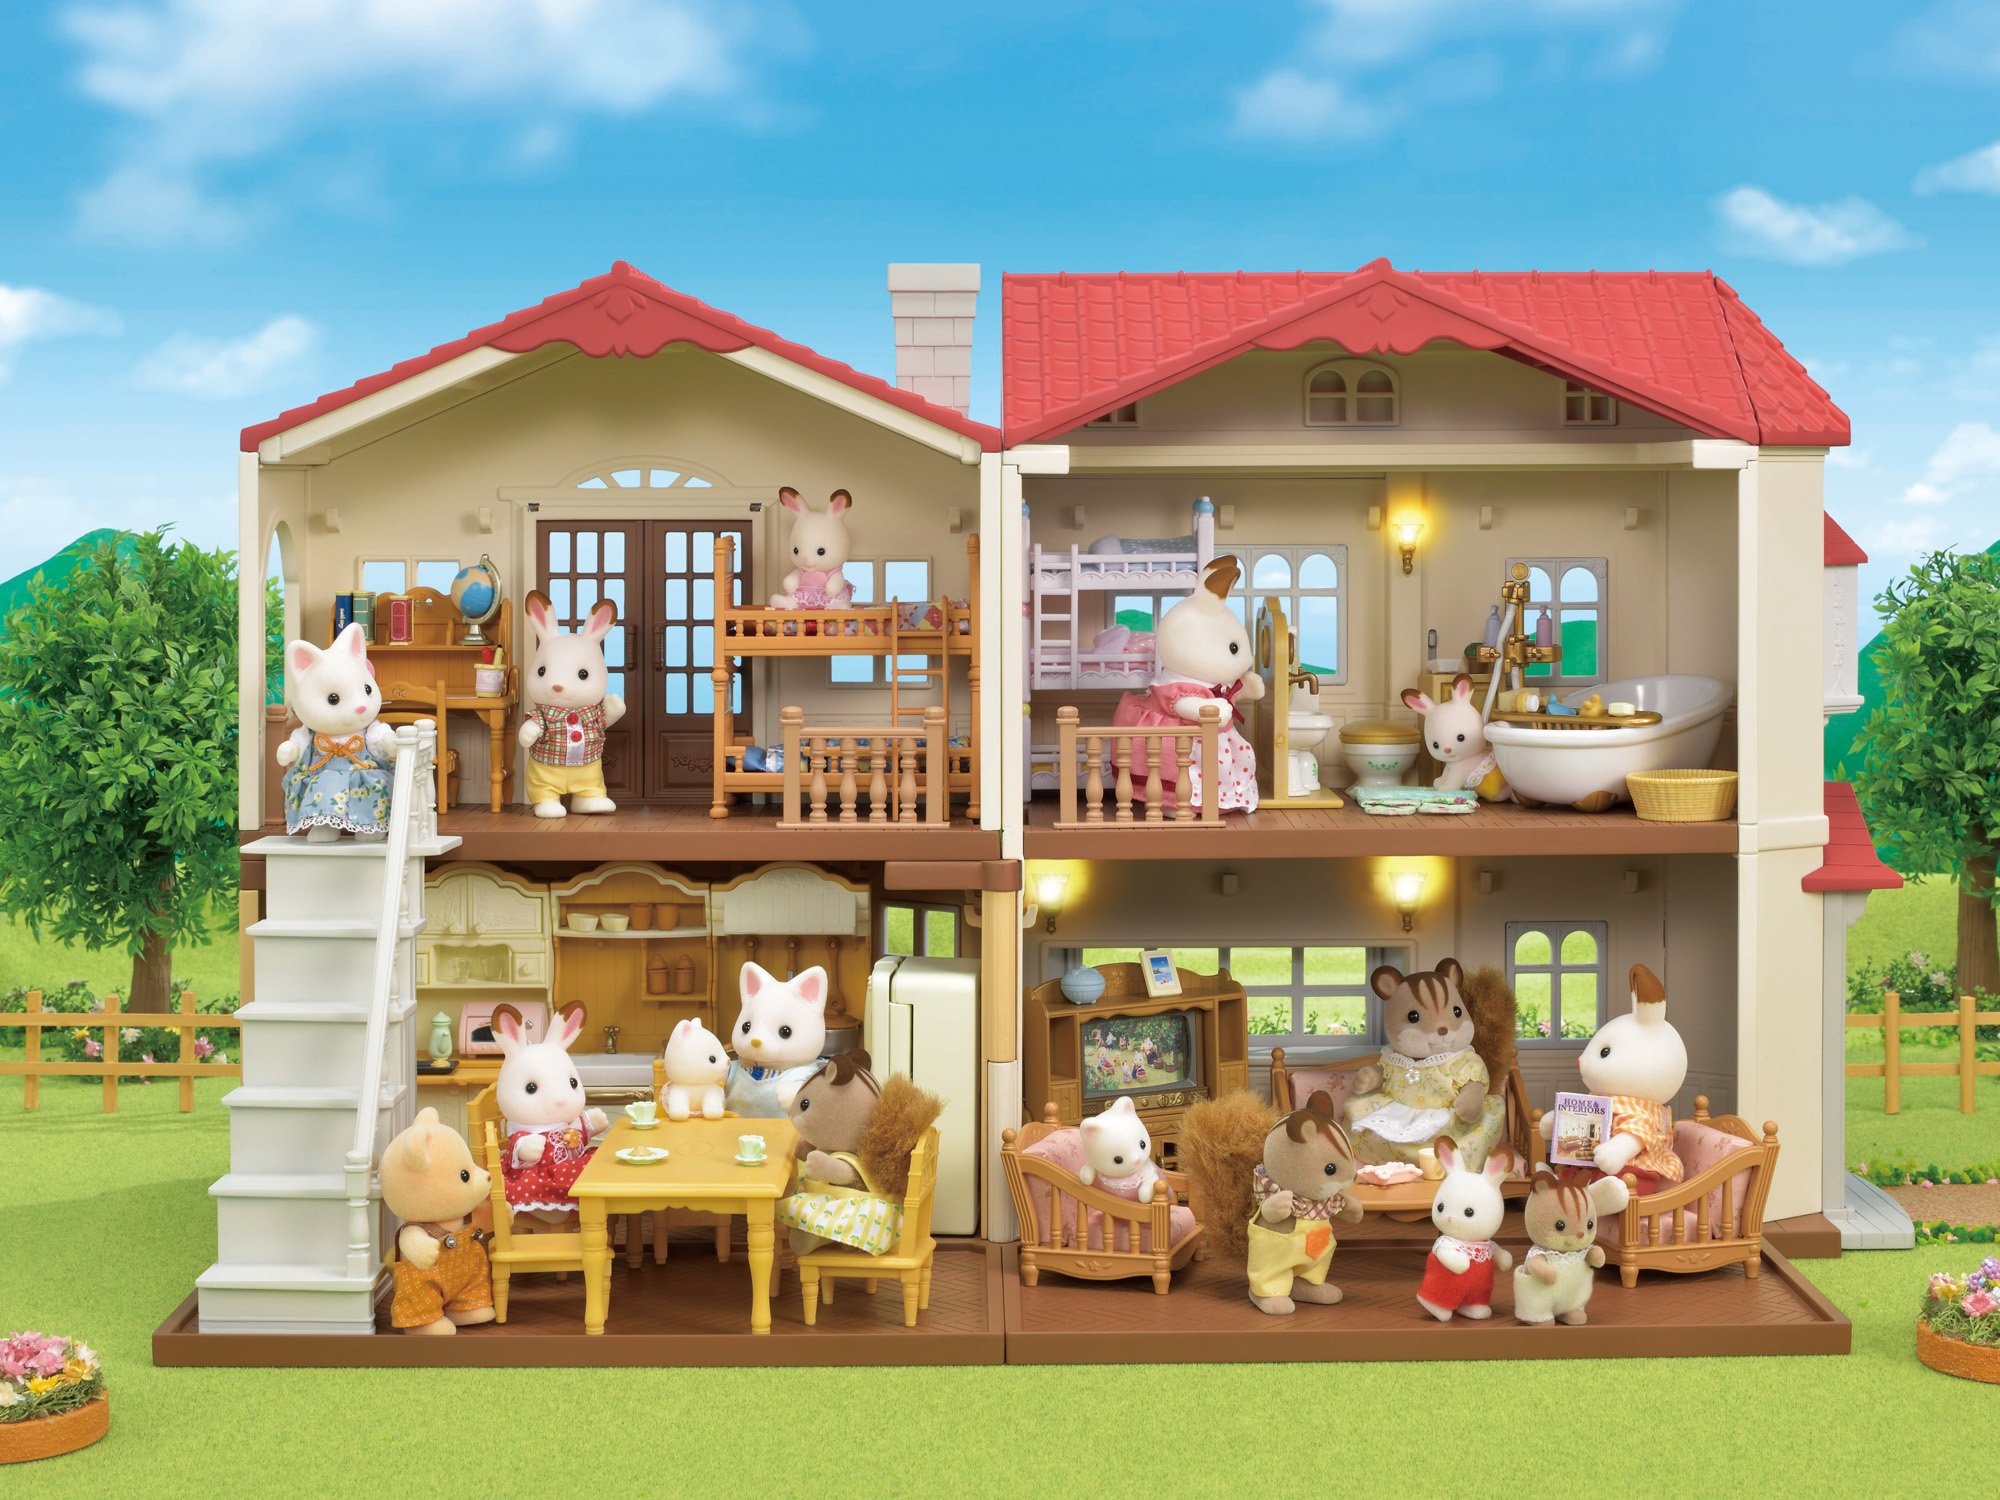 Calico Critters Red Roof Country Home Large